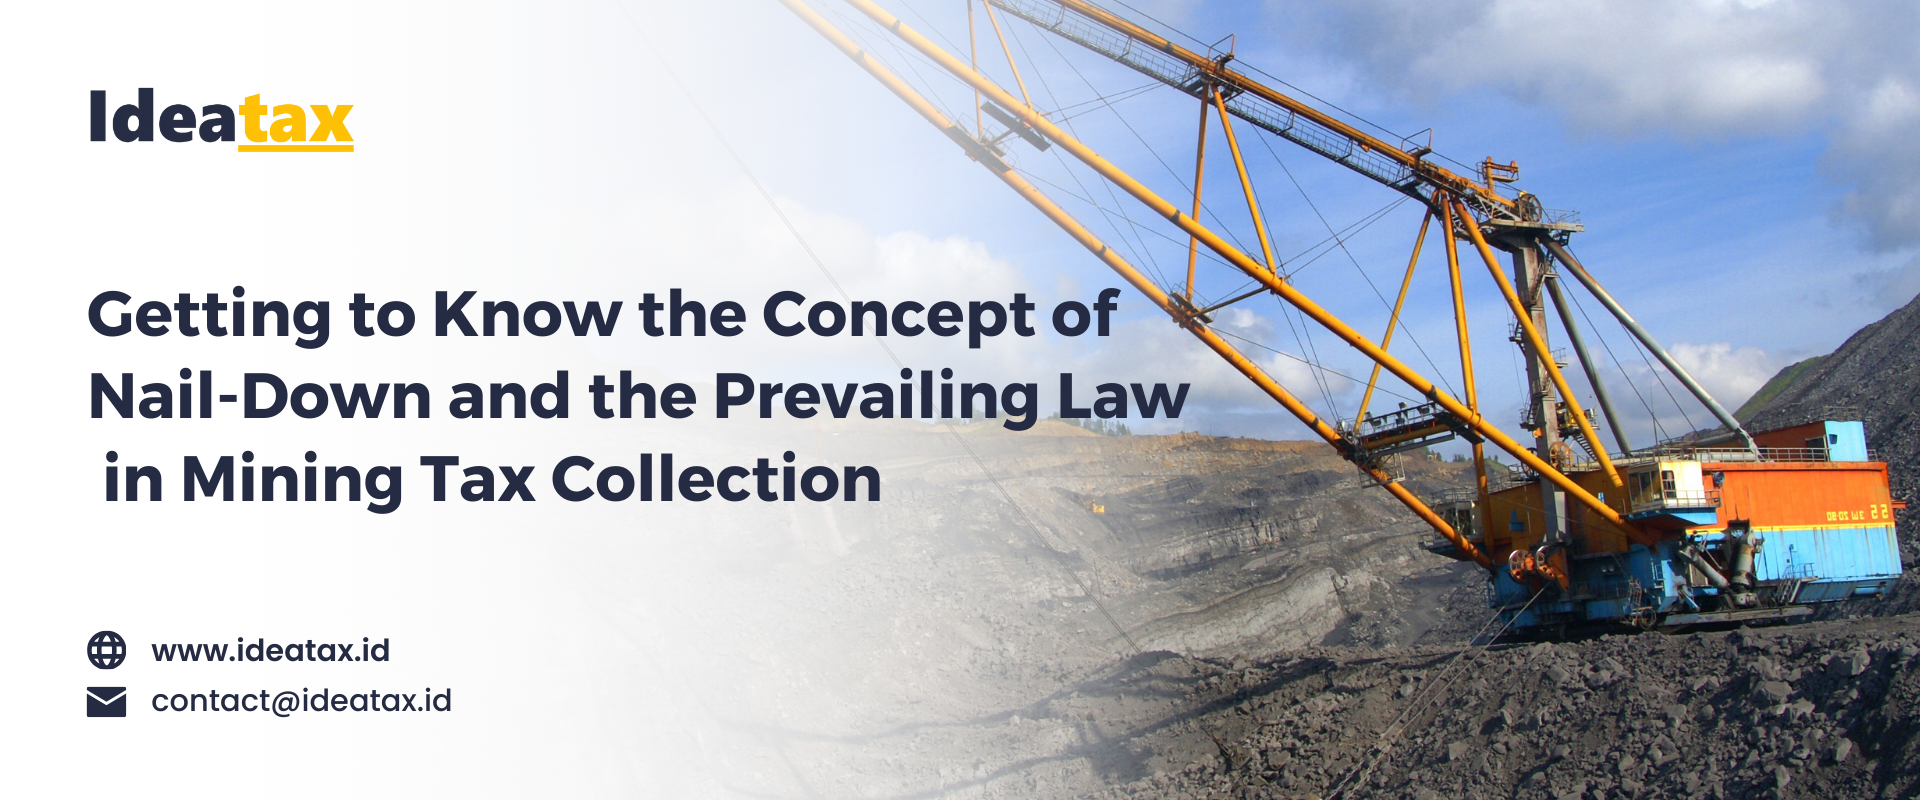 Getting to Know the Concept of Nail-Down and the Prevailing Law in Mining Tax Collection